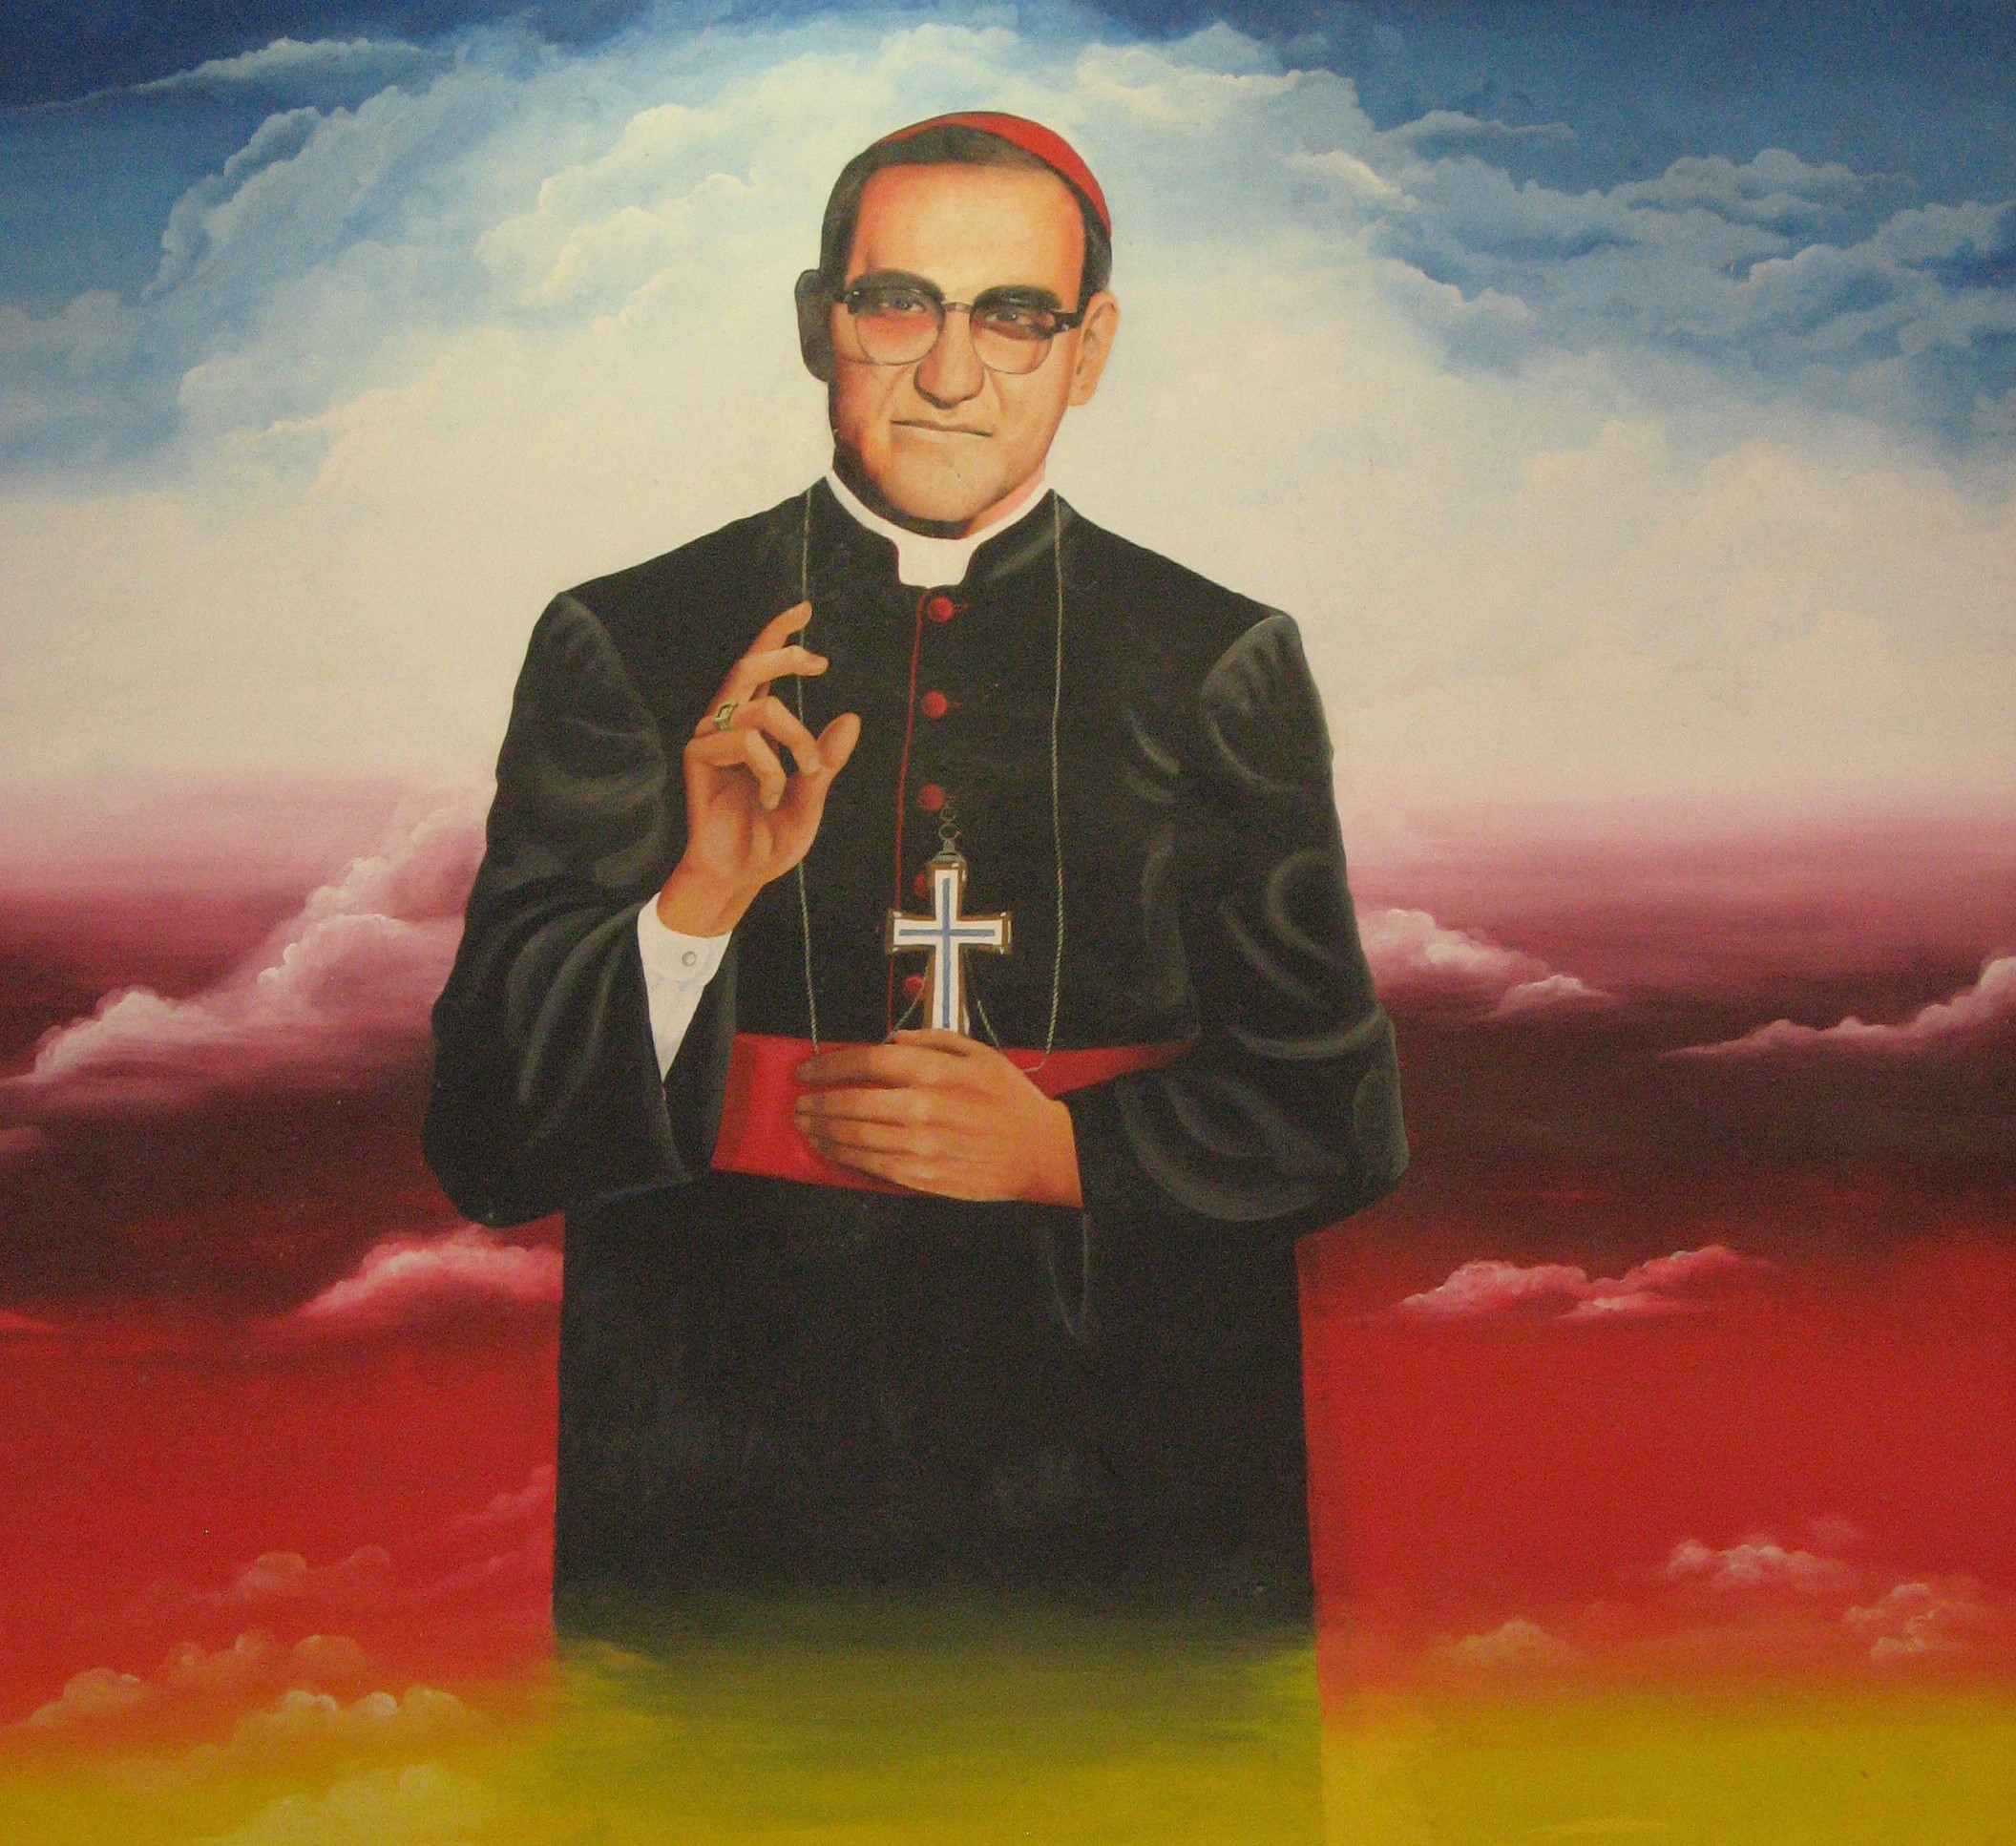 A mural at the University of El Salvador depicting Óscar Romero, Archbishop of San Salvador, who was a central figure in the Salvadorian Liberation Theology movement.